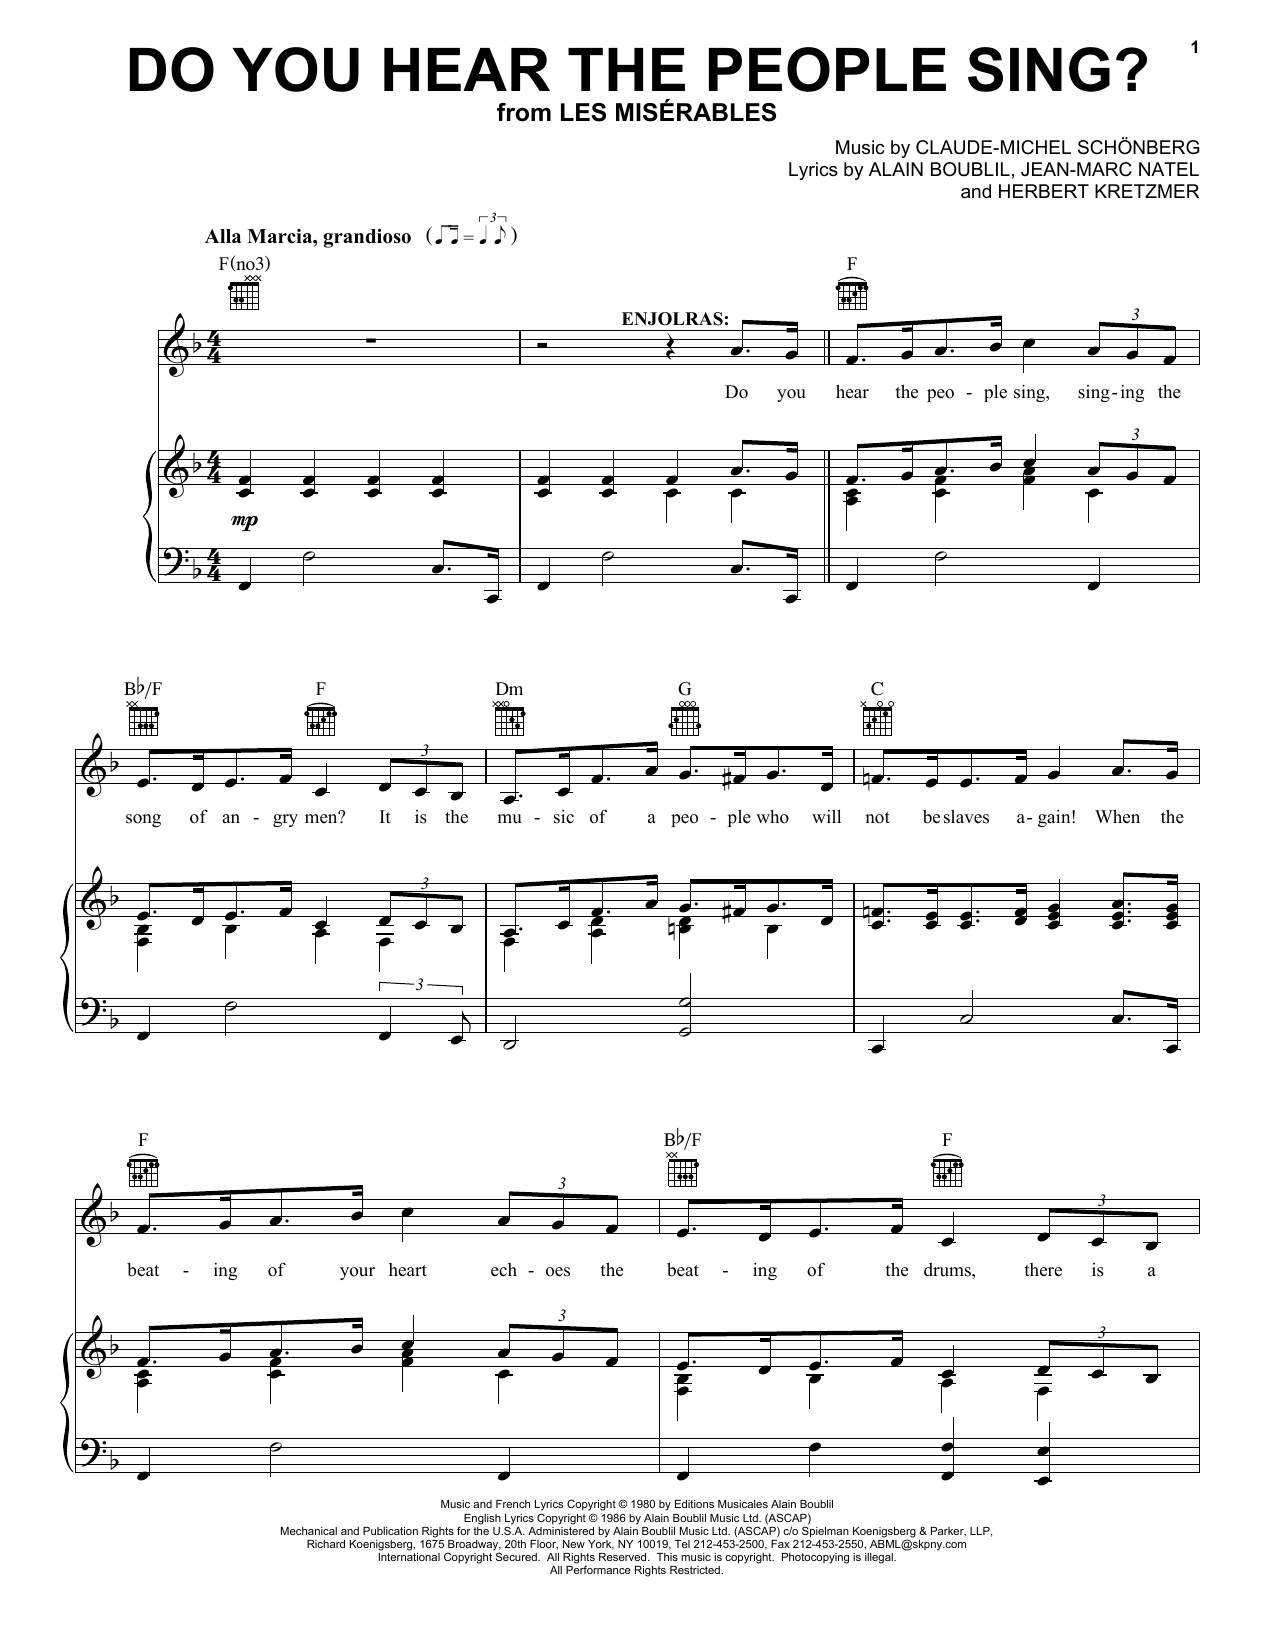 Download Alain Boublil Do You Hear The People Sing? Sheet Music